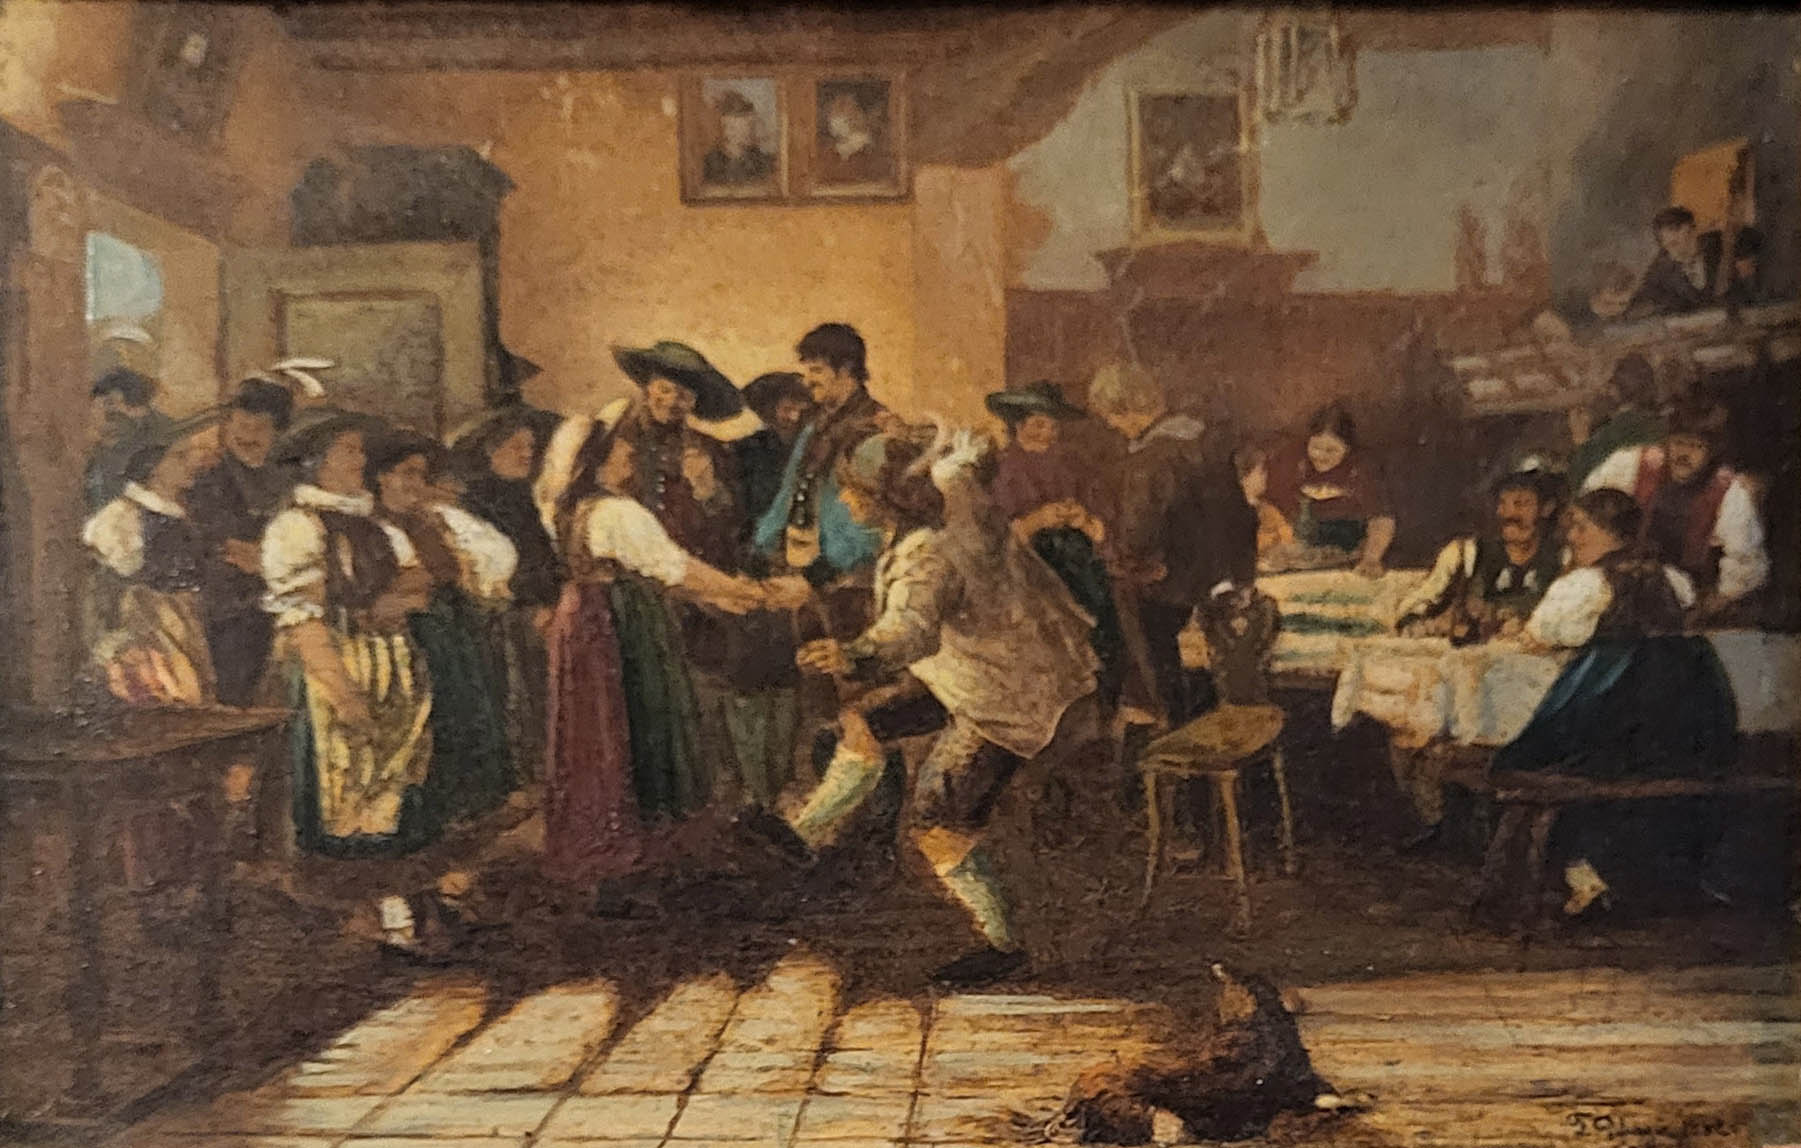 FRANZ VON DEFREGGER,1851 - 1921, OIL ON PANEL Tavern scene, interior view with figures dancing and - Image 2 of 4